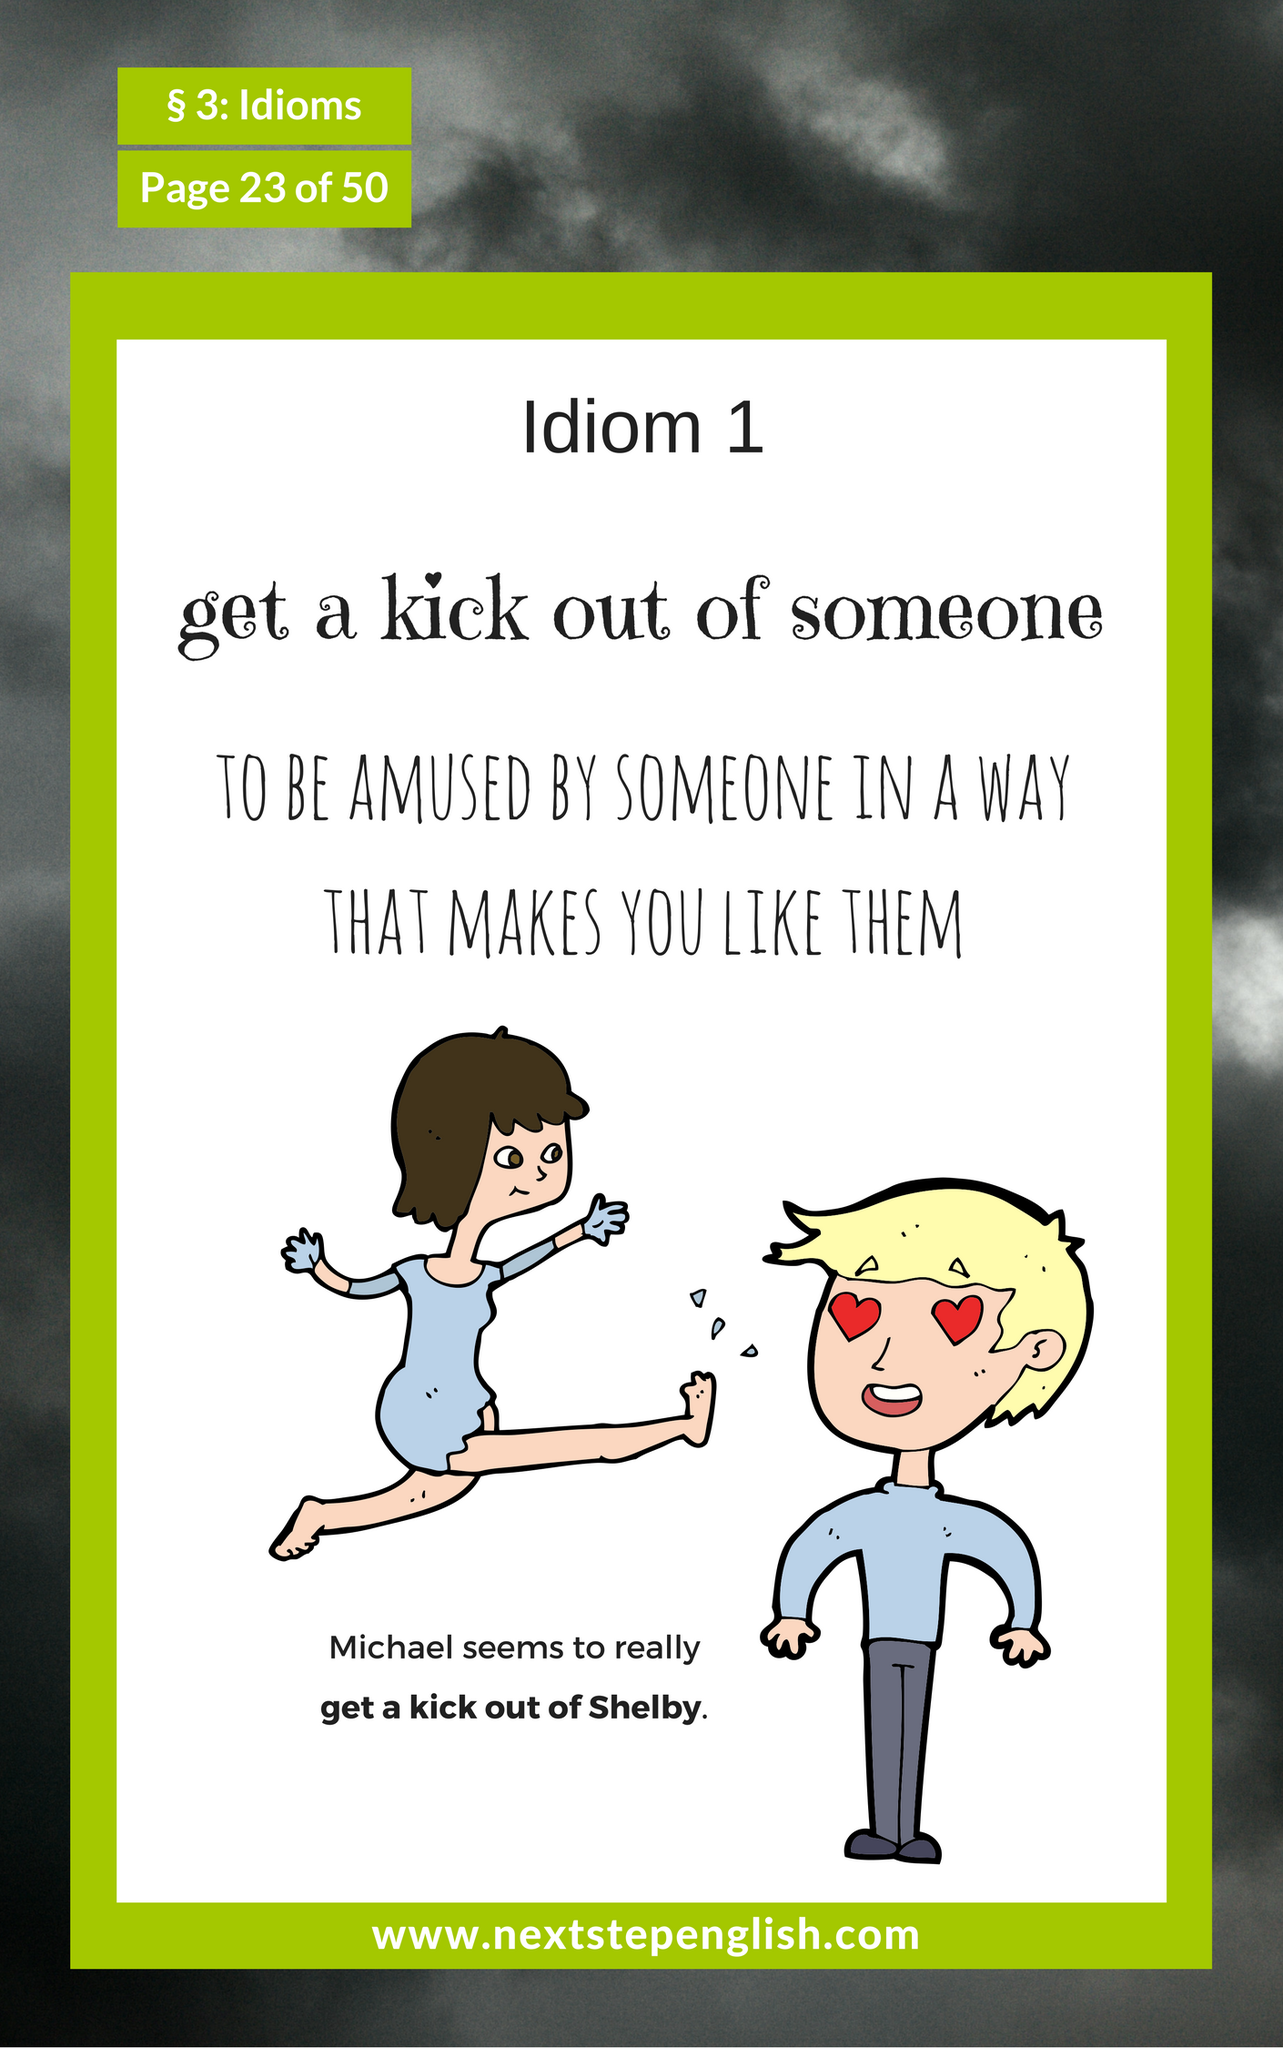 Next Step English I Get A Kick Out Of Tyler Tonight S Idiom Comes From Our Ebook For A Free Copy Join Our Email Family T Co T4i1hoblz0 T Co Wn5ozsrlgn